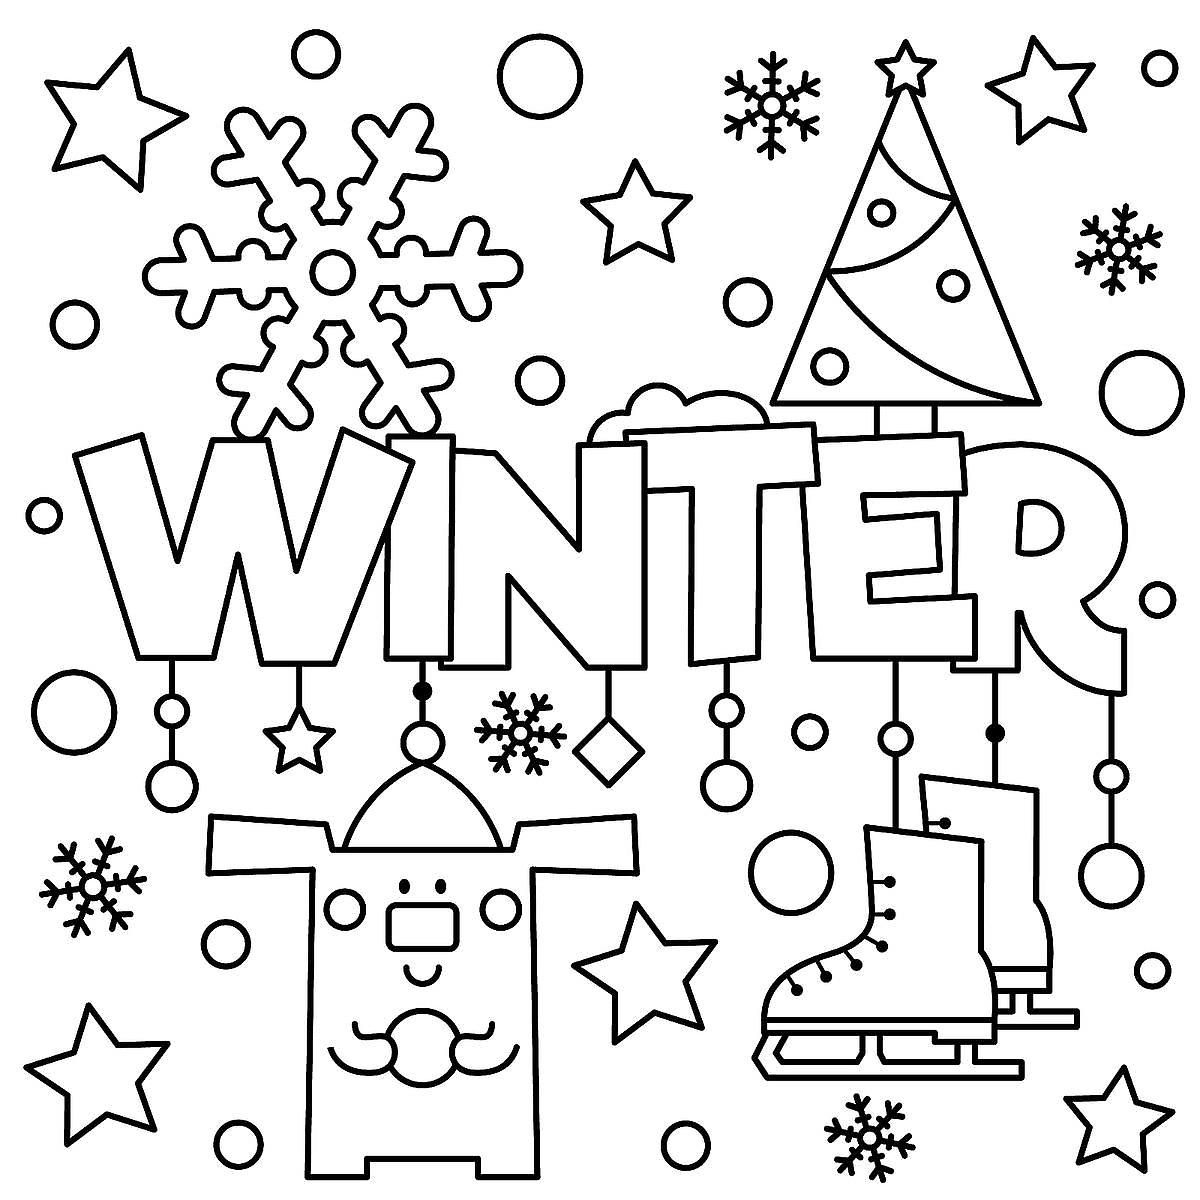 Winter Puzzle &amp;amp; Coloring Pages: Printable Winter-Themed Activity - Printable Winter Puzzle